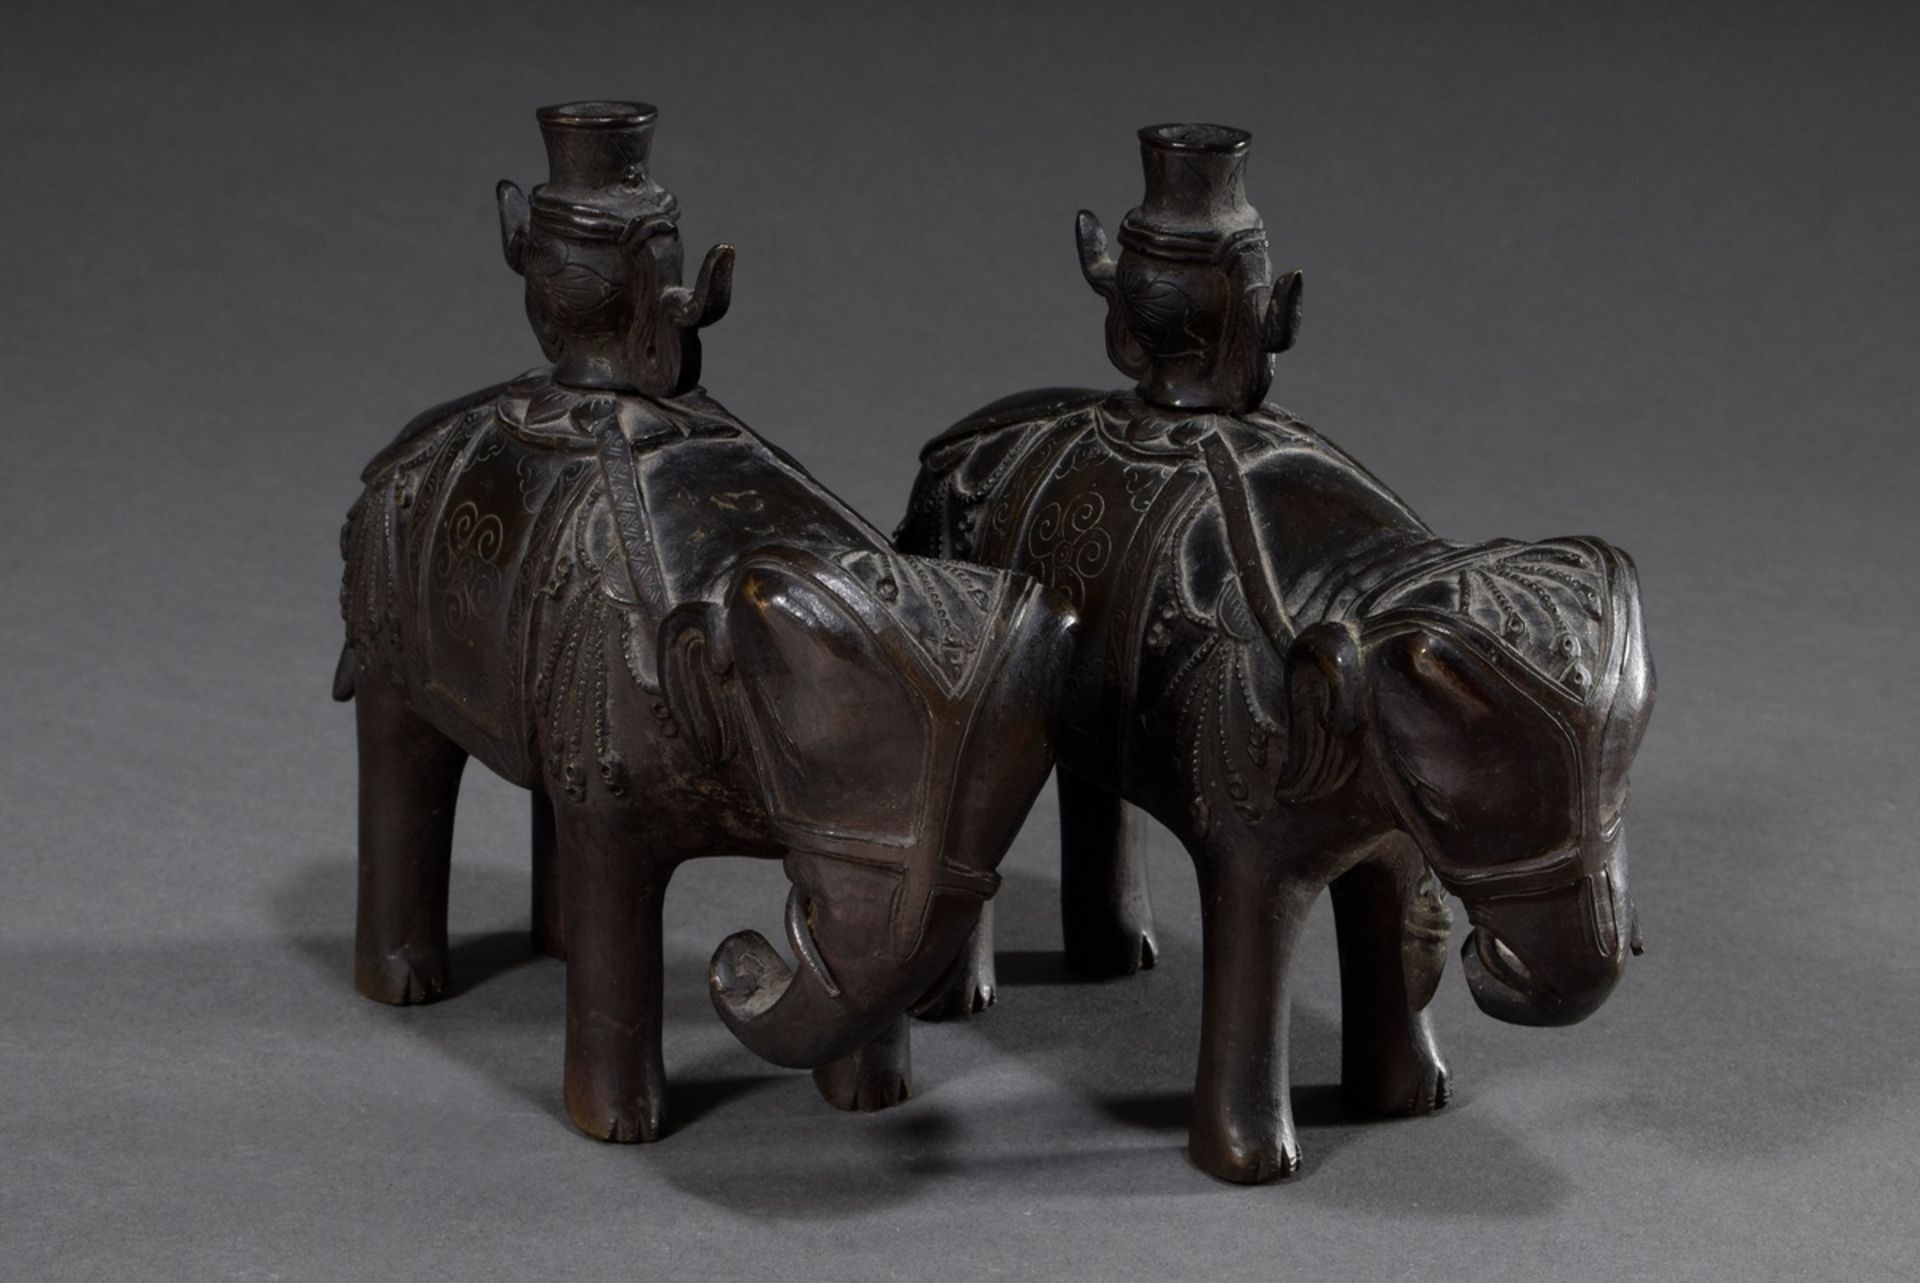 Pair of Chinese bronze elephants with vases on their backs, formerly candlesticks of an altar set o - Image 3 of 5